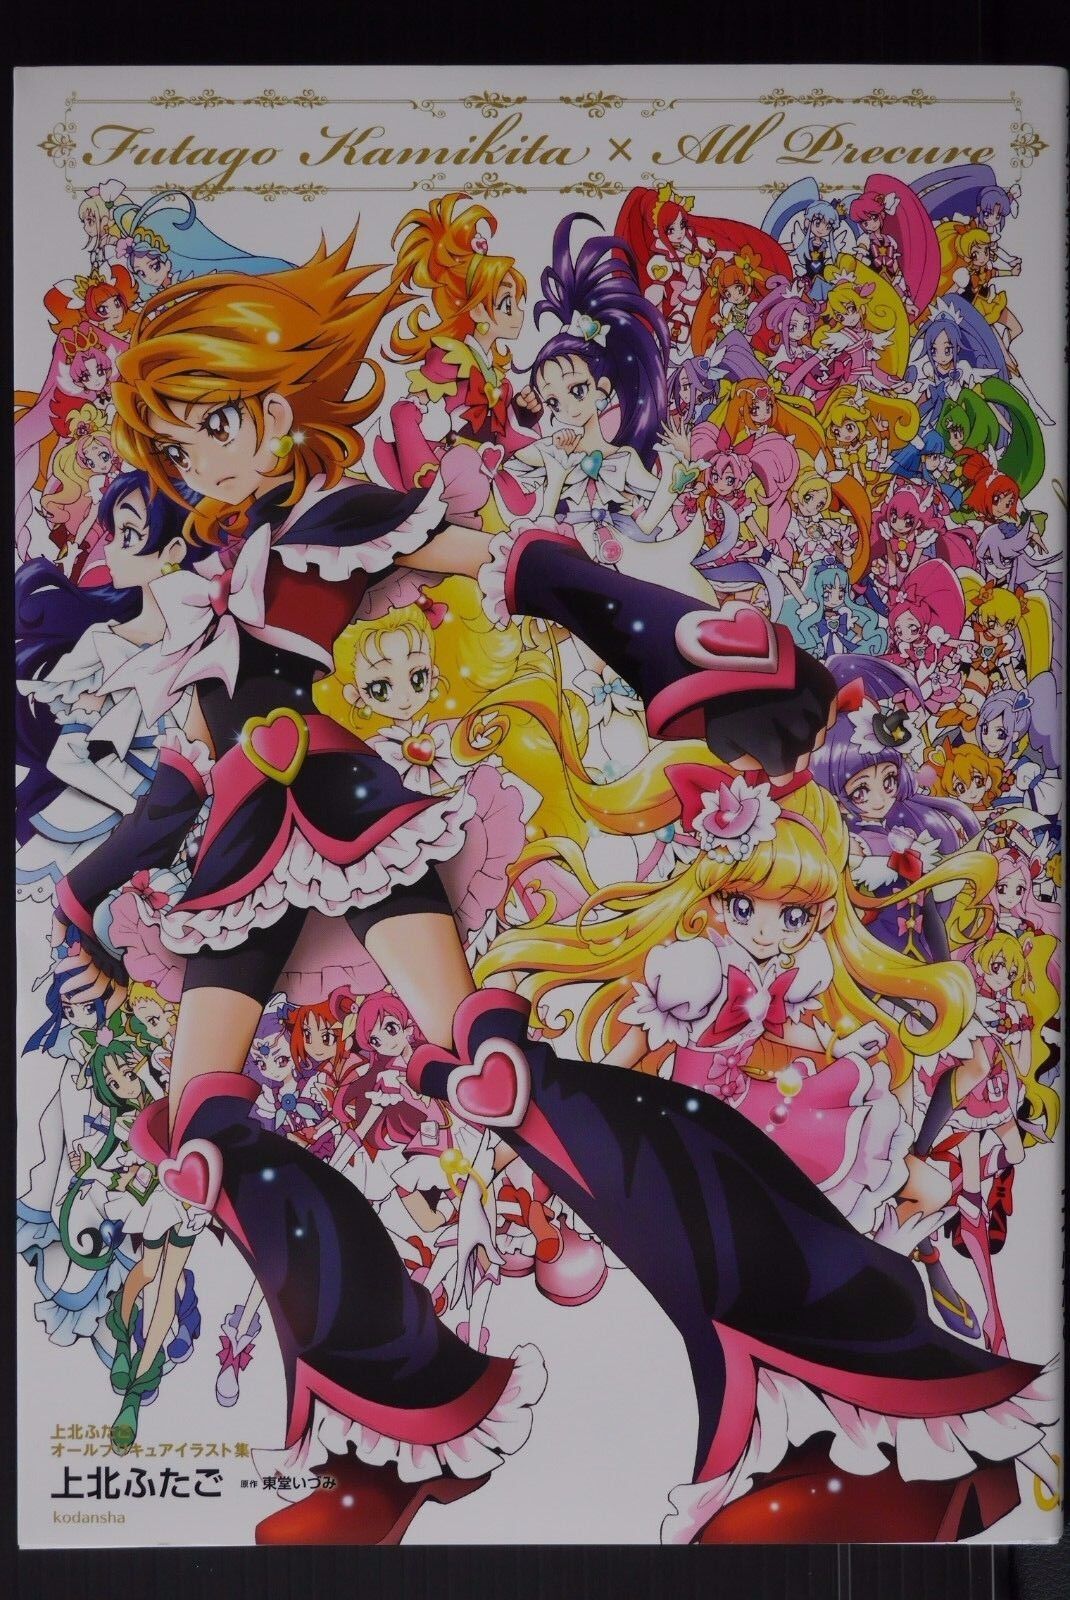 All Precure Illustrations - Pretty Cure Art Book by Futago Kamikita from JAPAN